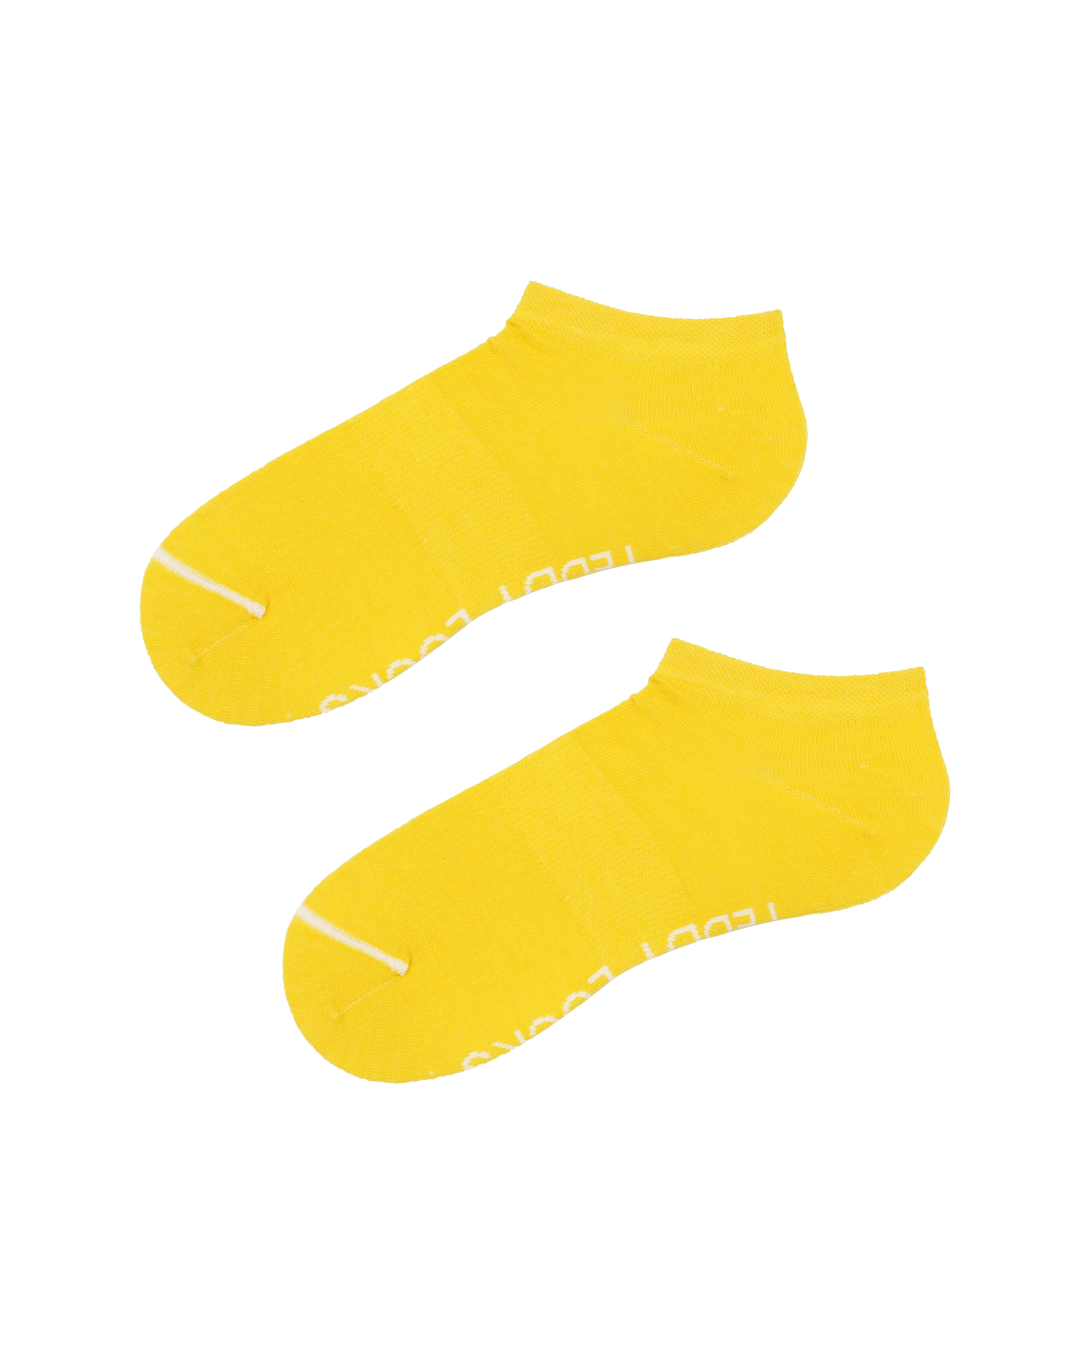 yellow low athletic socks made from recycled plastic bottles. Sustainable gift ideas